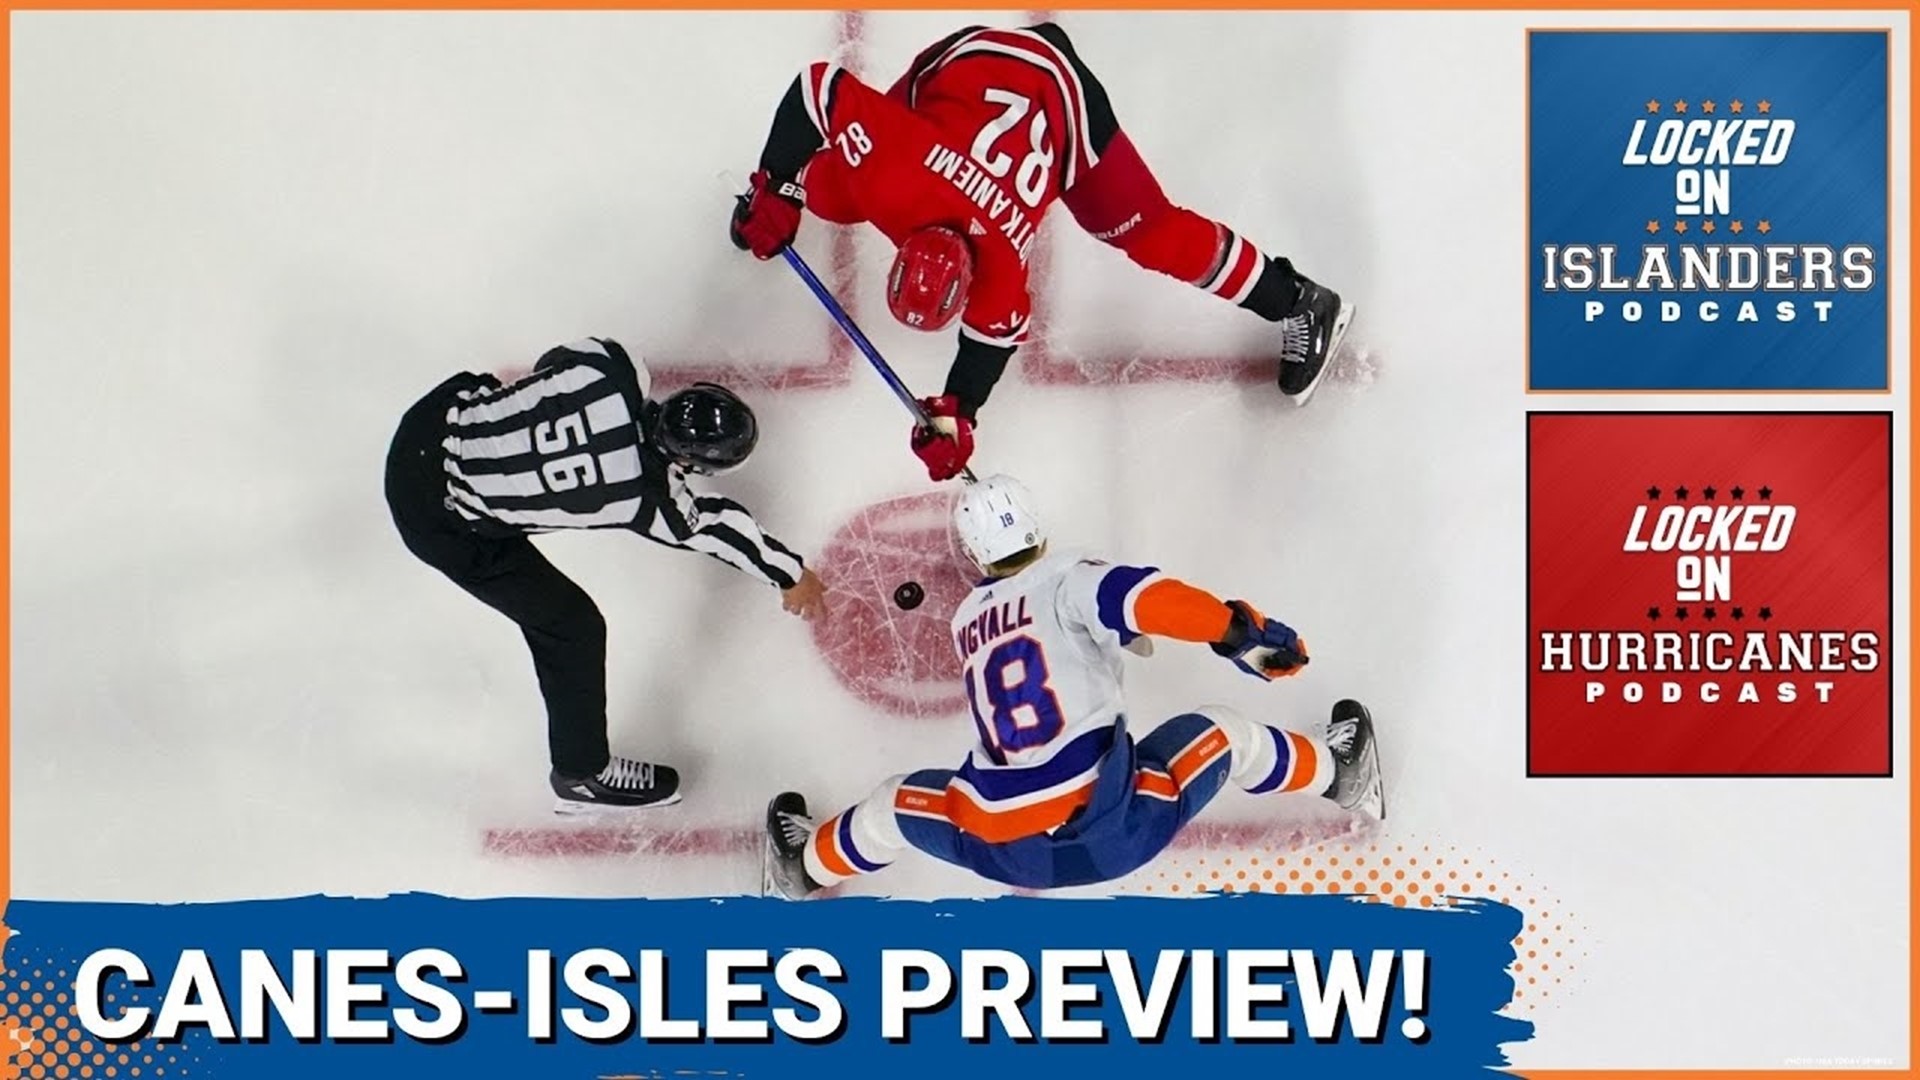 The New York Islanders will face the Carolina Hurricanes in the first round of the Stanley Cup Playoffs and we have an in-depth preview of the series.